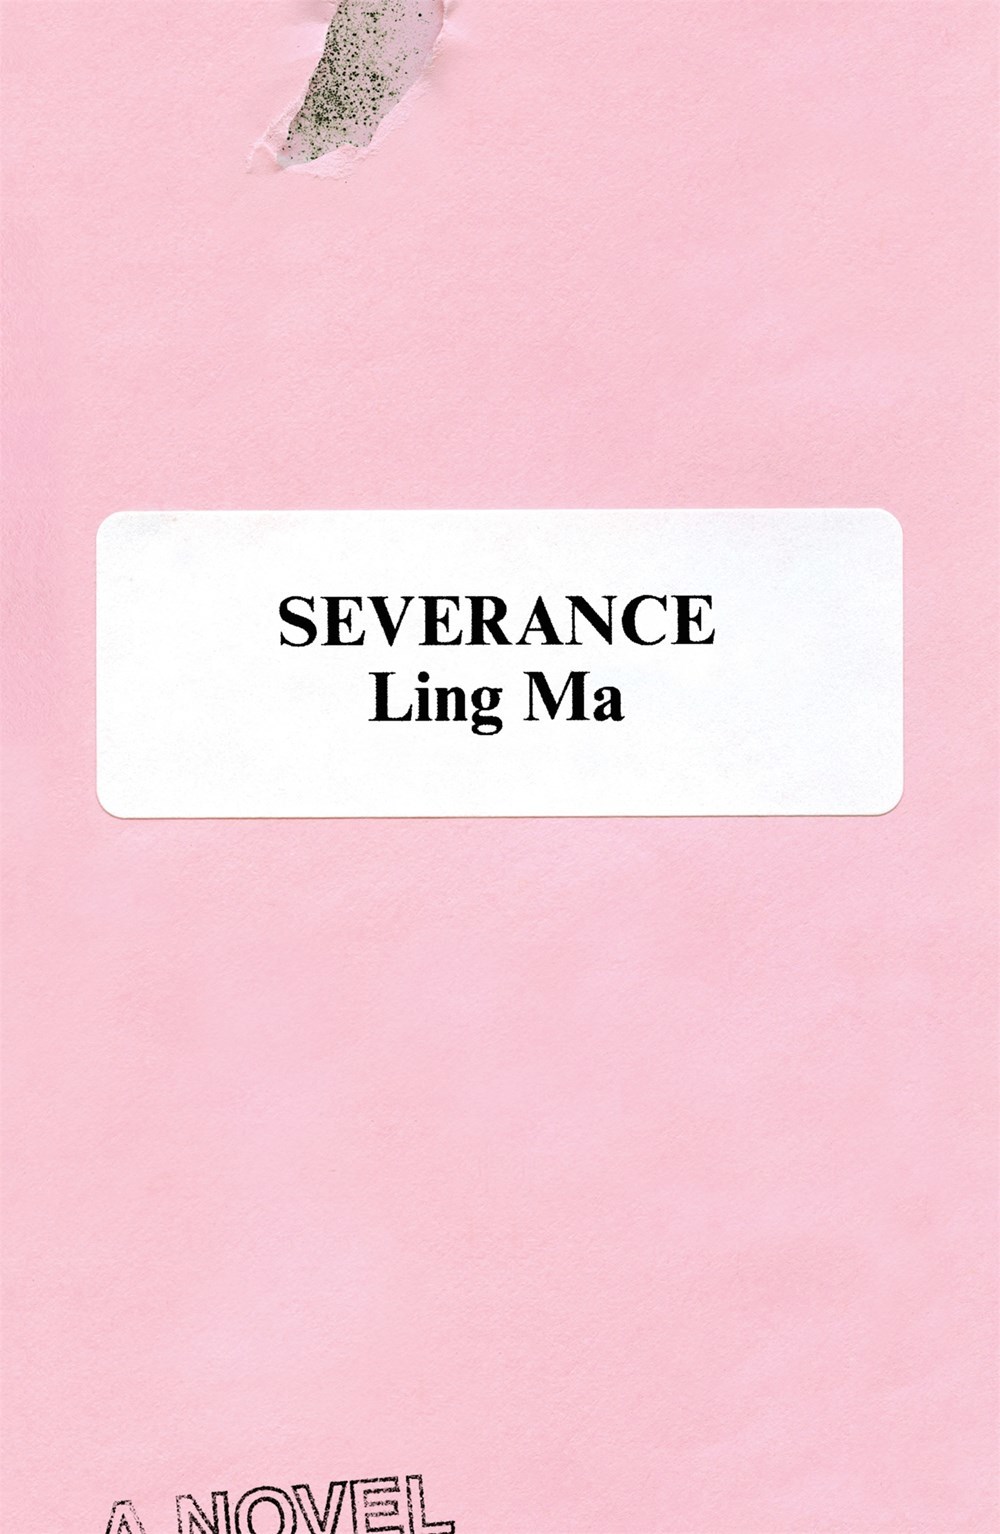 16. Severance by Ling Ma